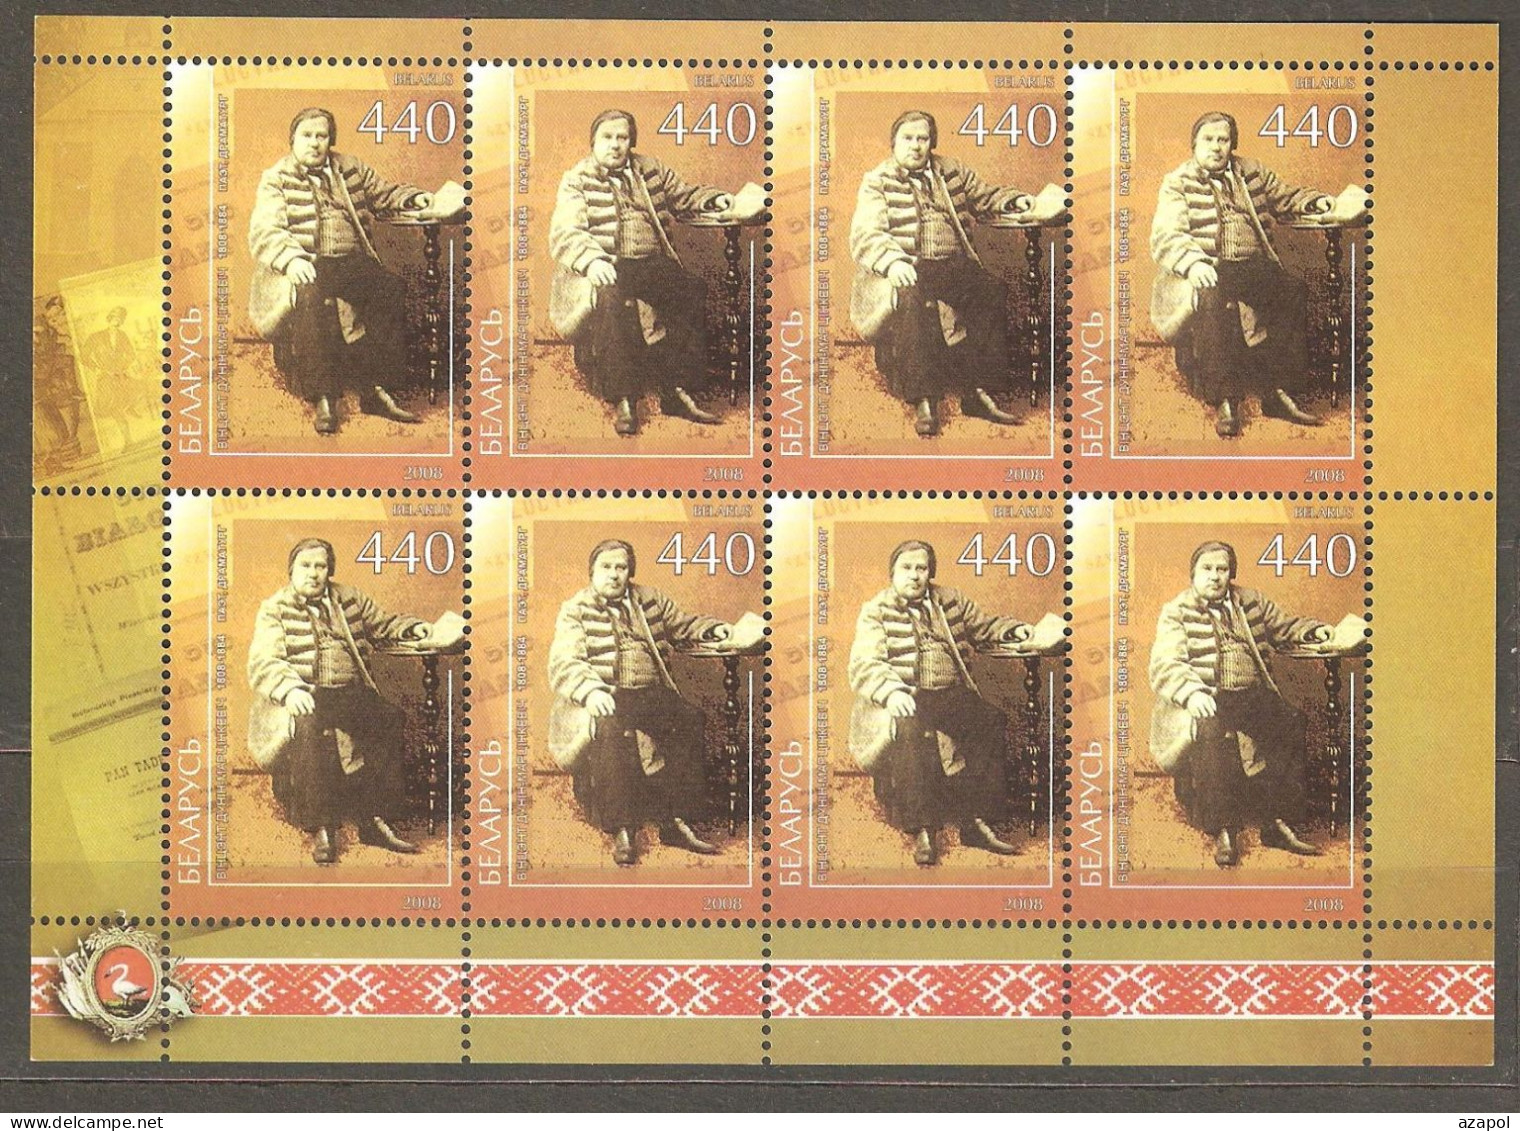 Belarus: 1 Mint Sheetlet, 200th Anniversary Of The Birth Of Poet Vincent Dunin-Marcinkevich, 2008, Mi#701, MNH - Writers